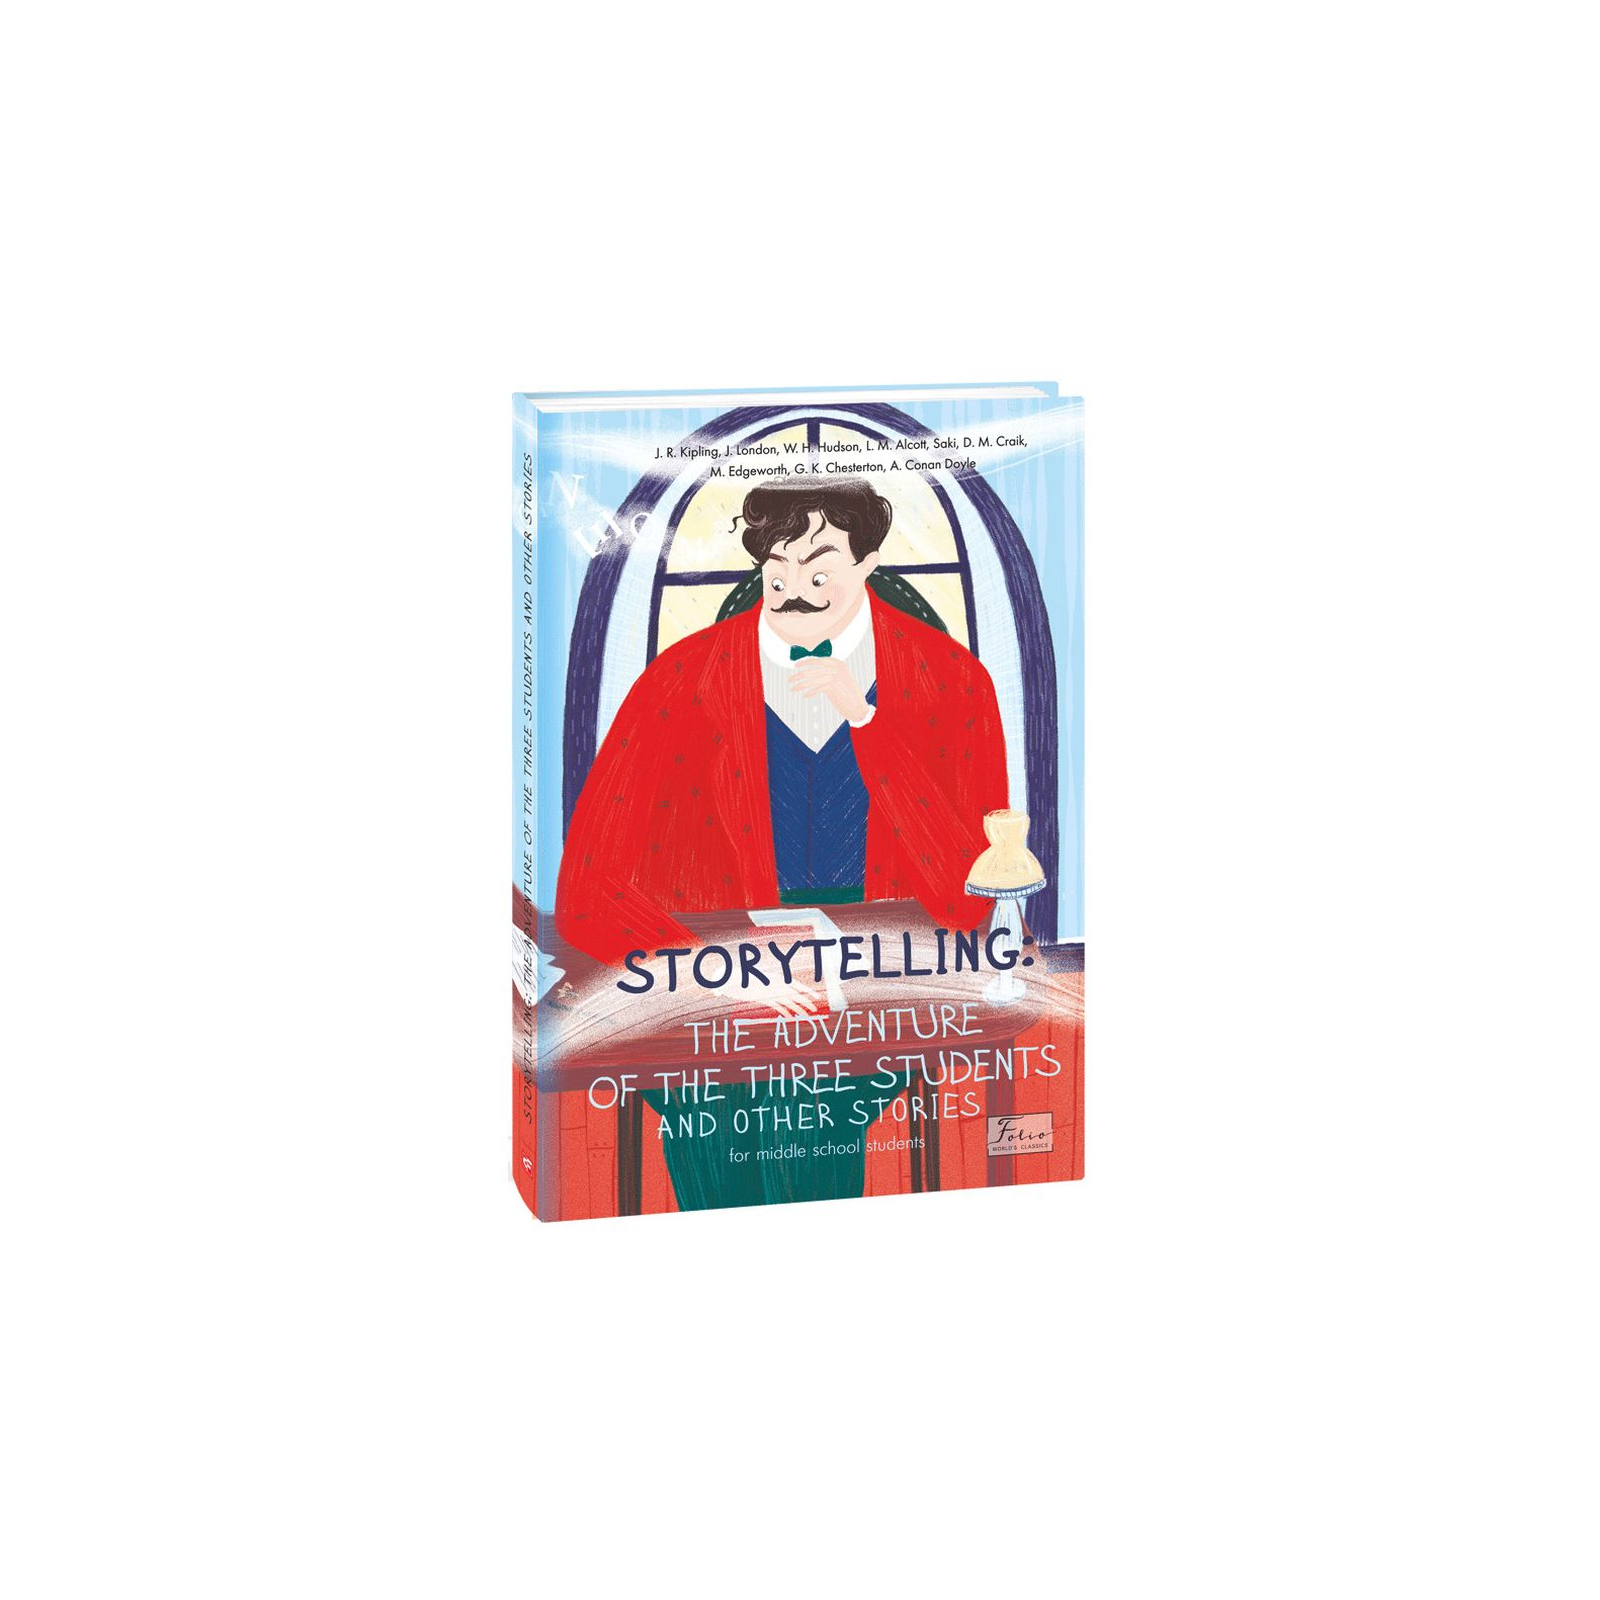 Книга Storytelling. Тhe Adventure of the Three Students and Other Stories (for middle school students) Фоліо (9789660397194) изображение 2